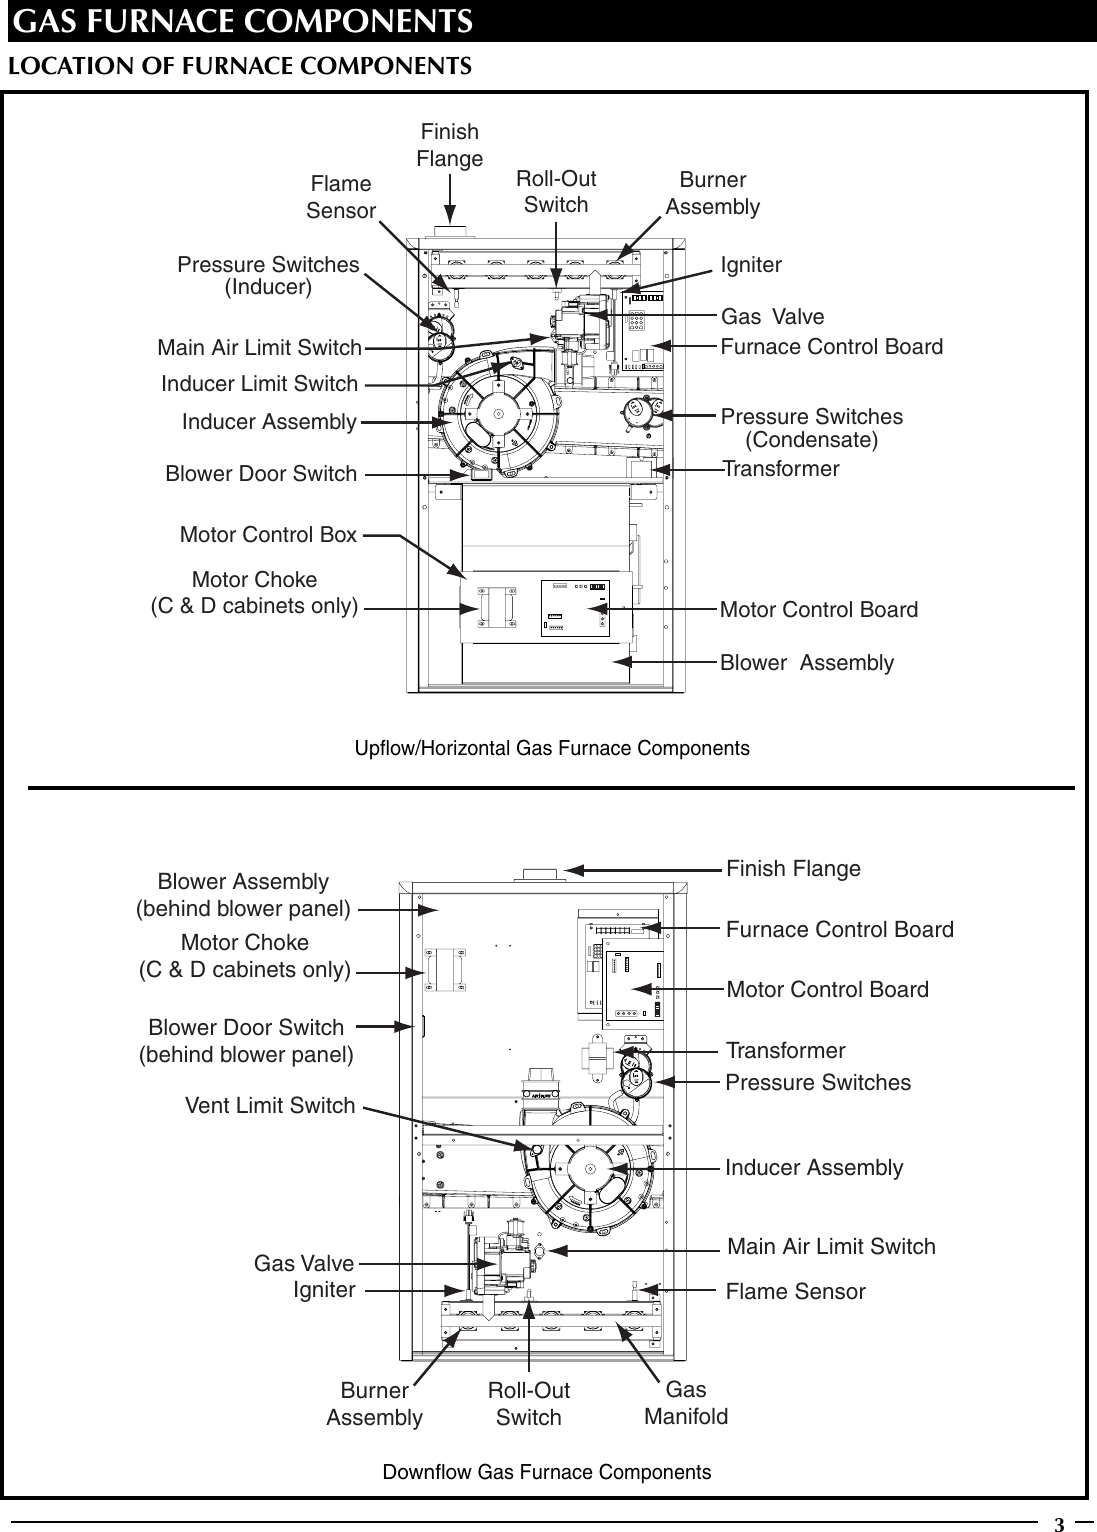 Page 3 of 8 - Maytag Maytag-Pgc2Tc-Pgc2Tl-Maytag-M1200-95-1-Afue-Two-Stage-Fixed-Speed-Gas-Furnace-Technical-Literature- PGC2T(C,L) Series Gas Furnaces Technical Specifications  Maytag-pgc2tc-pgc2tl-maytag-m1200-95-1-afue-two-stage-fixed-speed-gas-furnace-technical-literature